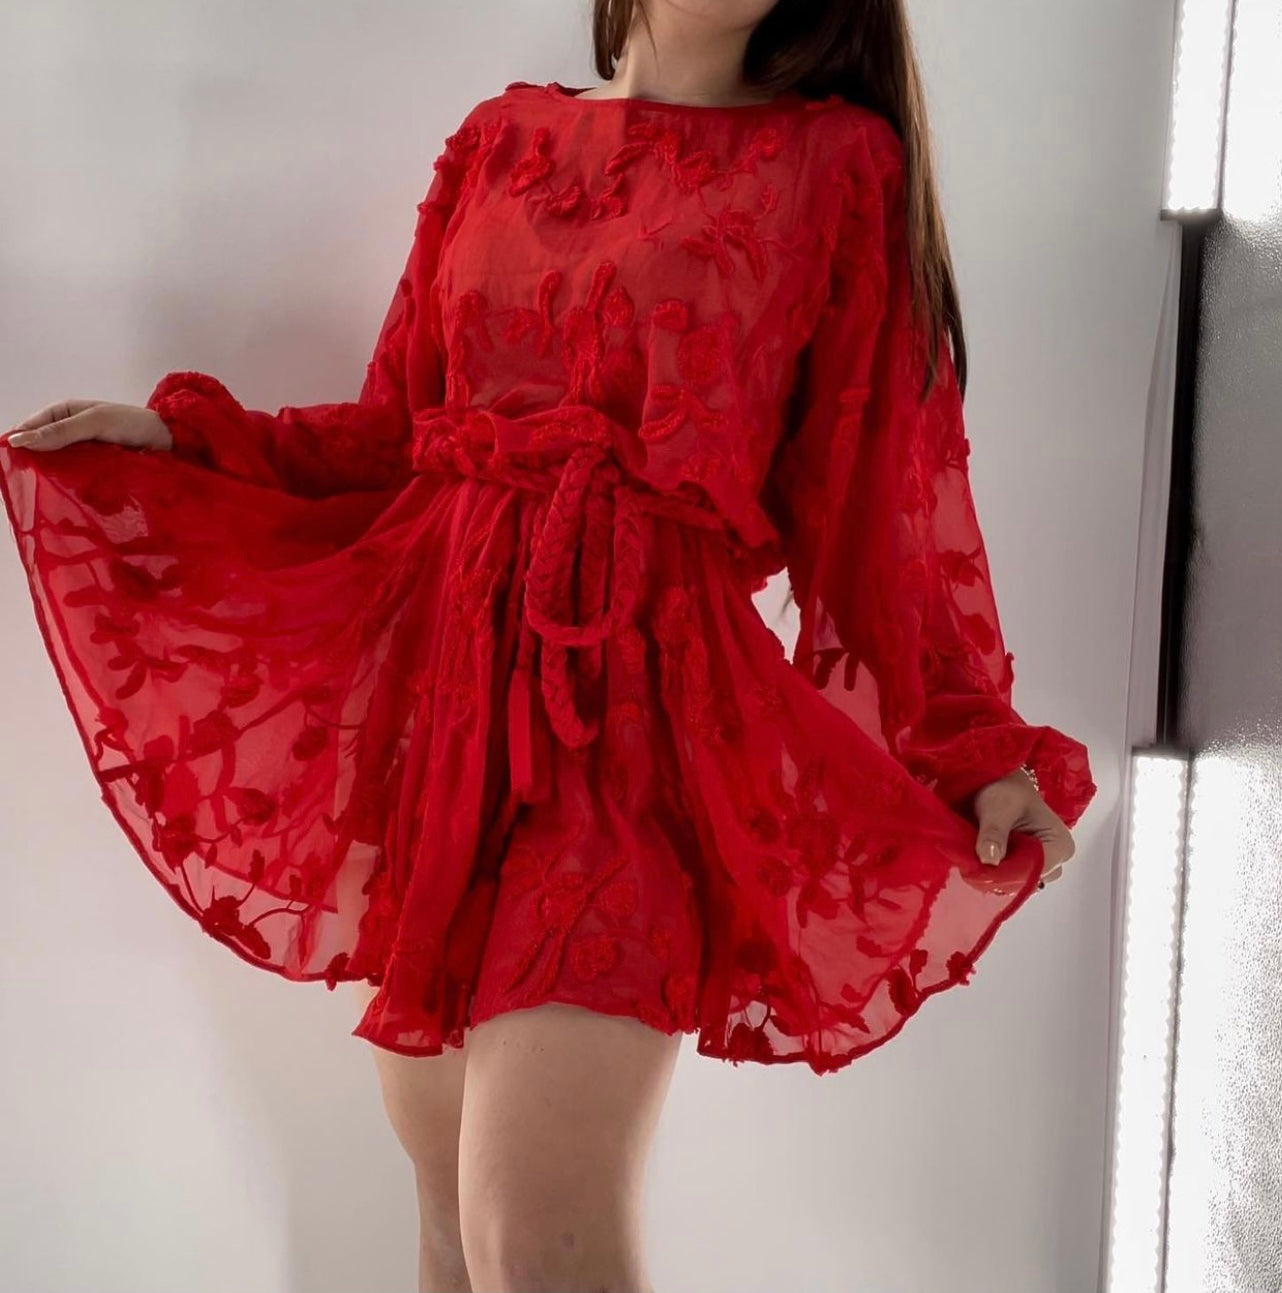 Mare Mare - Red Mesh Embroidered Flower Mini Dress